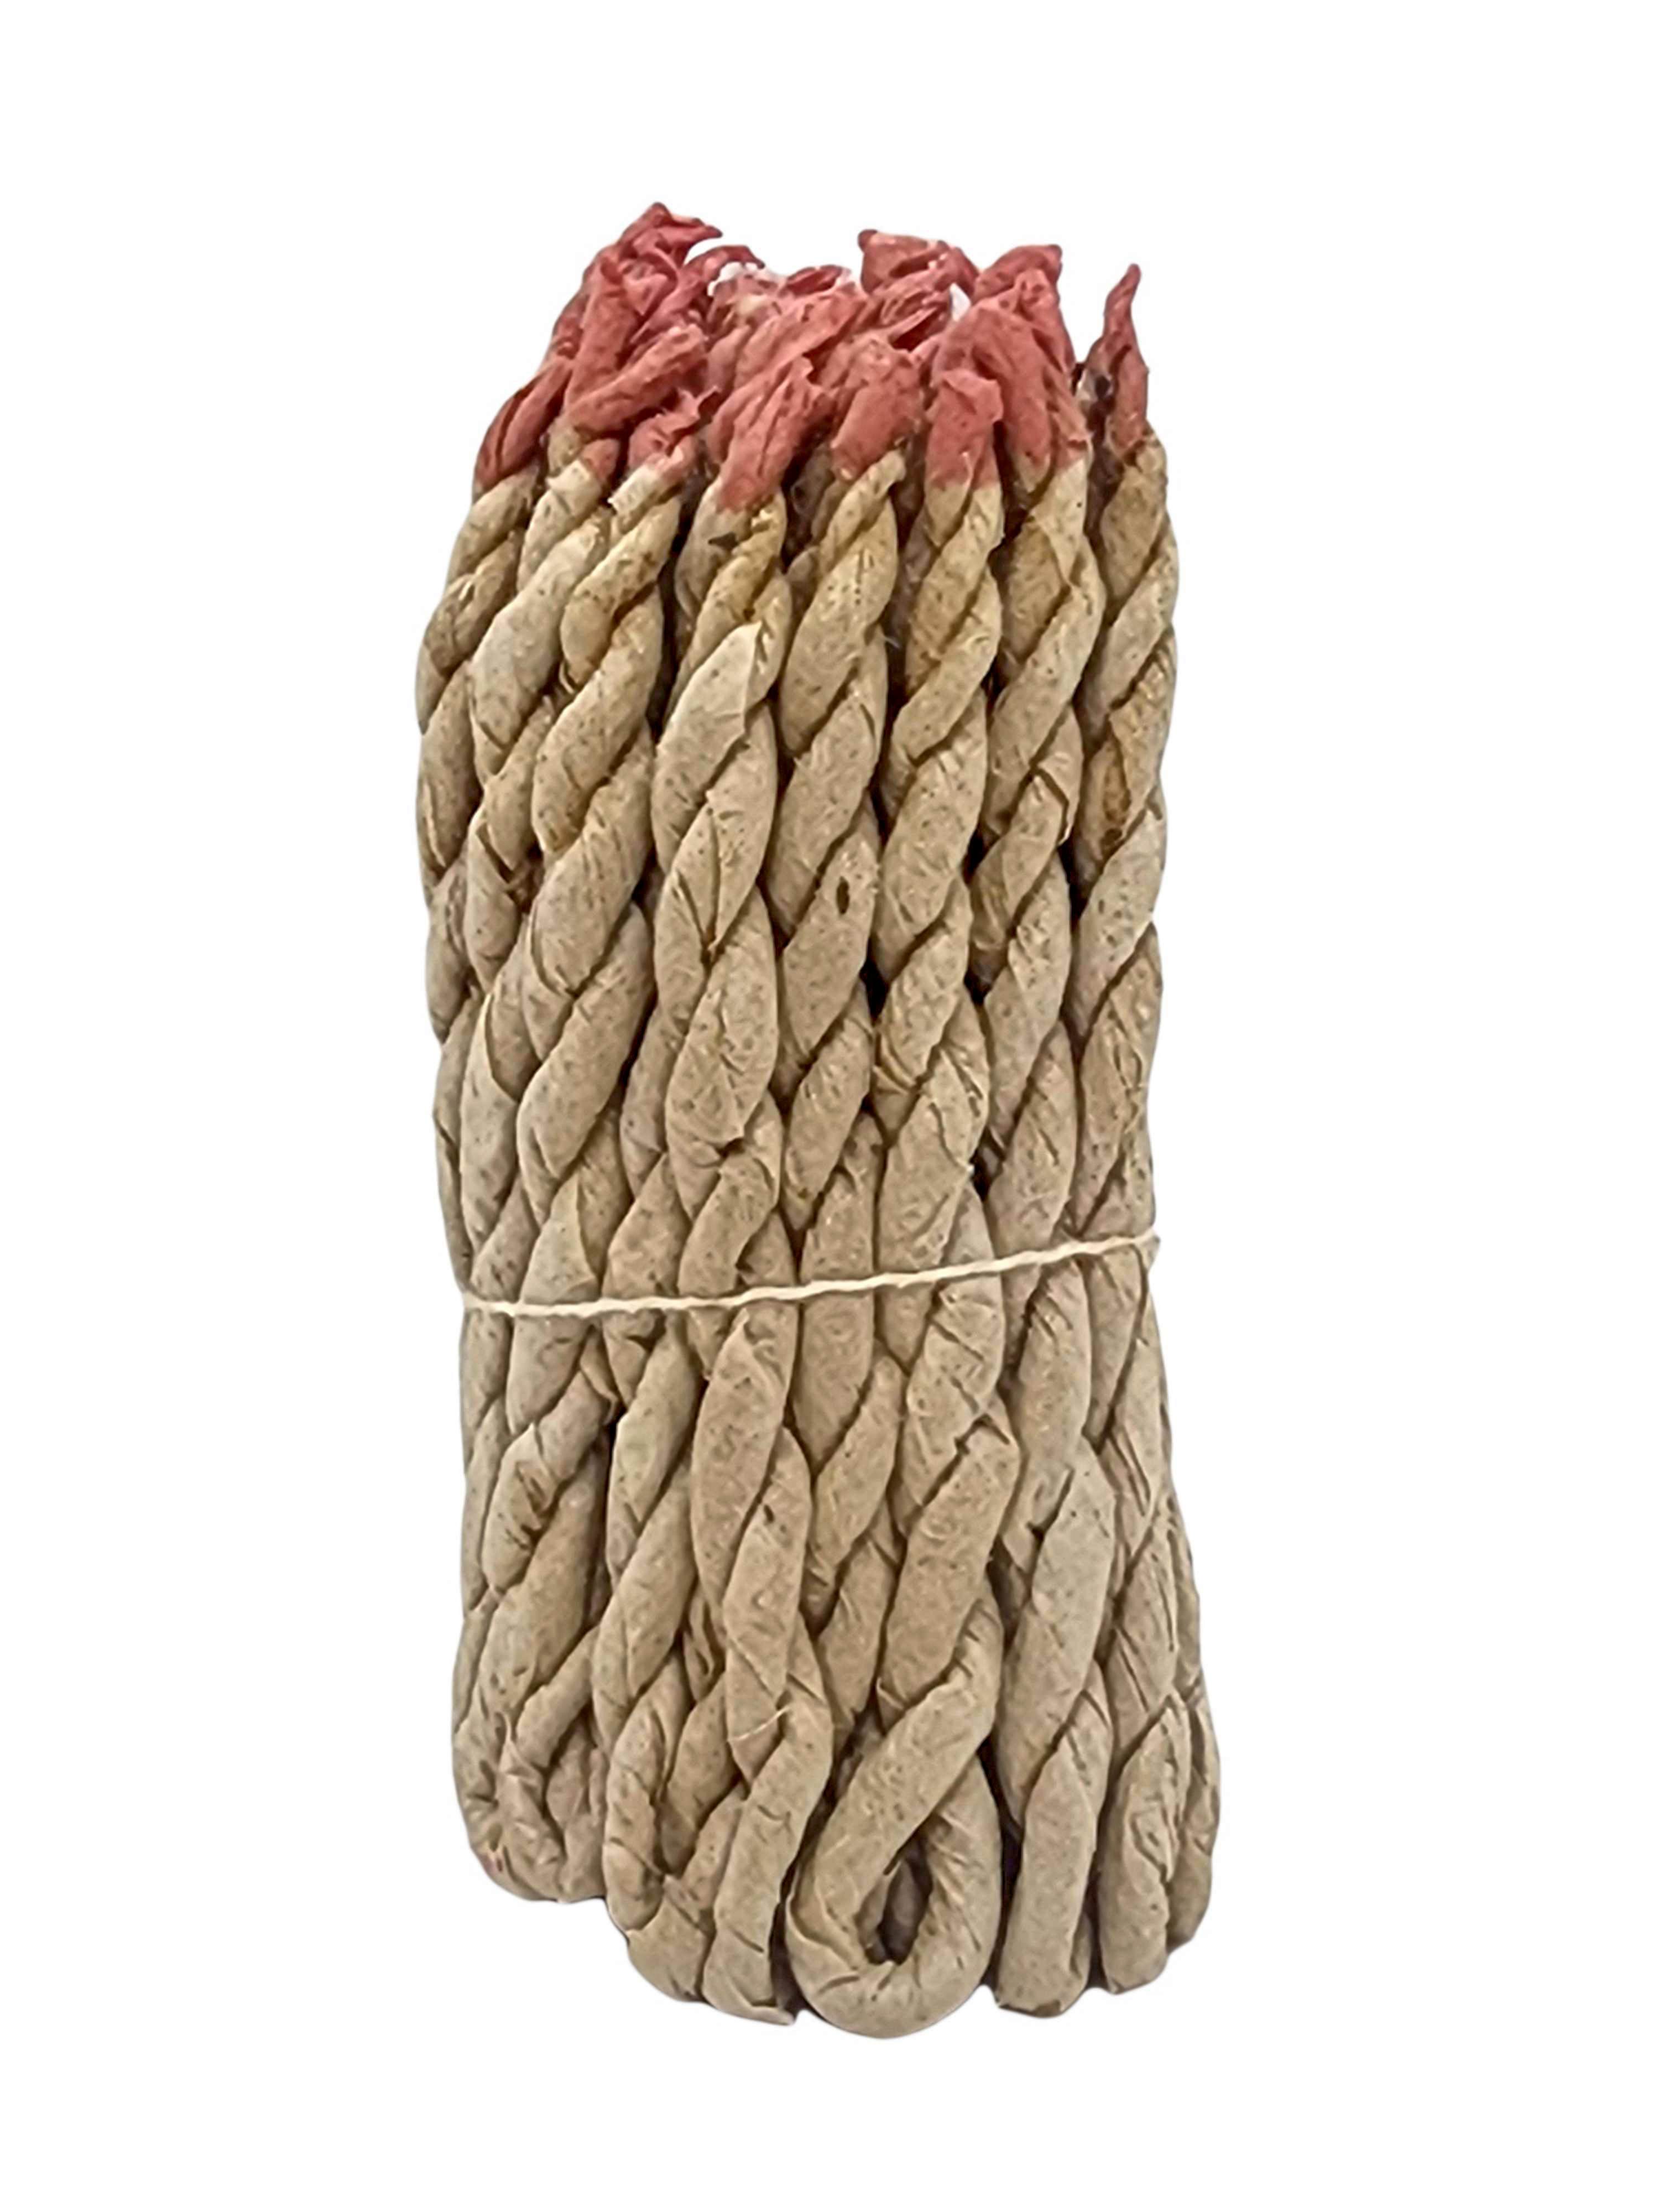 Sandal Wood Traditional Handmade Rope Incense, high Quality, Made In Nepal